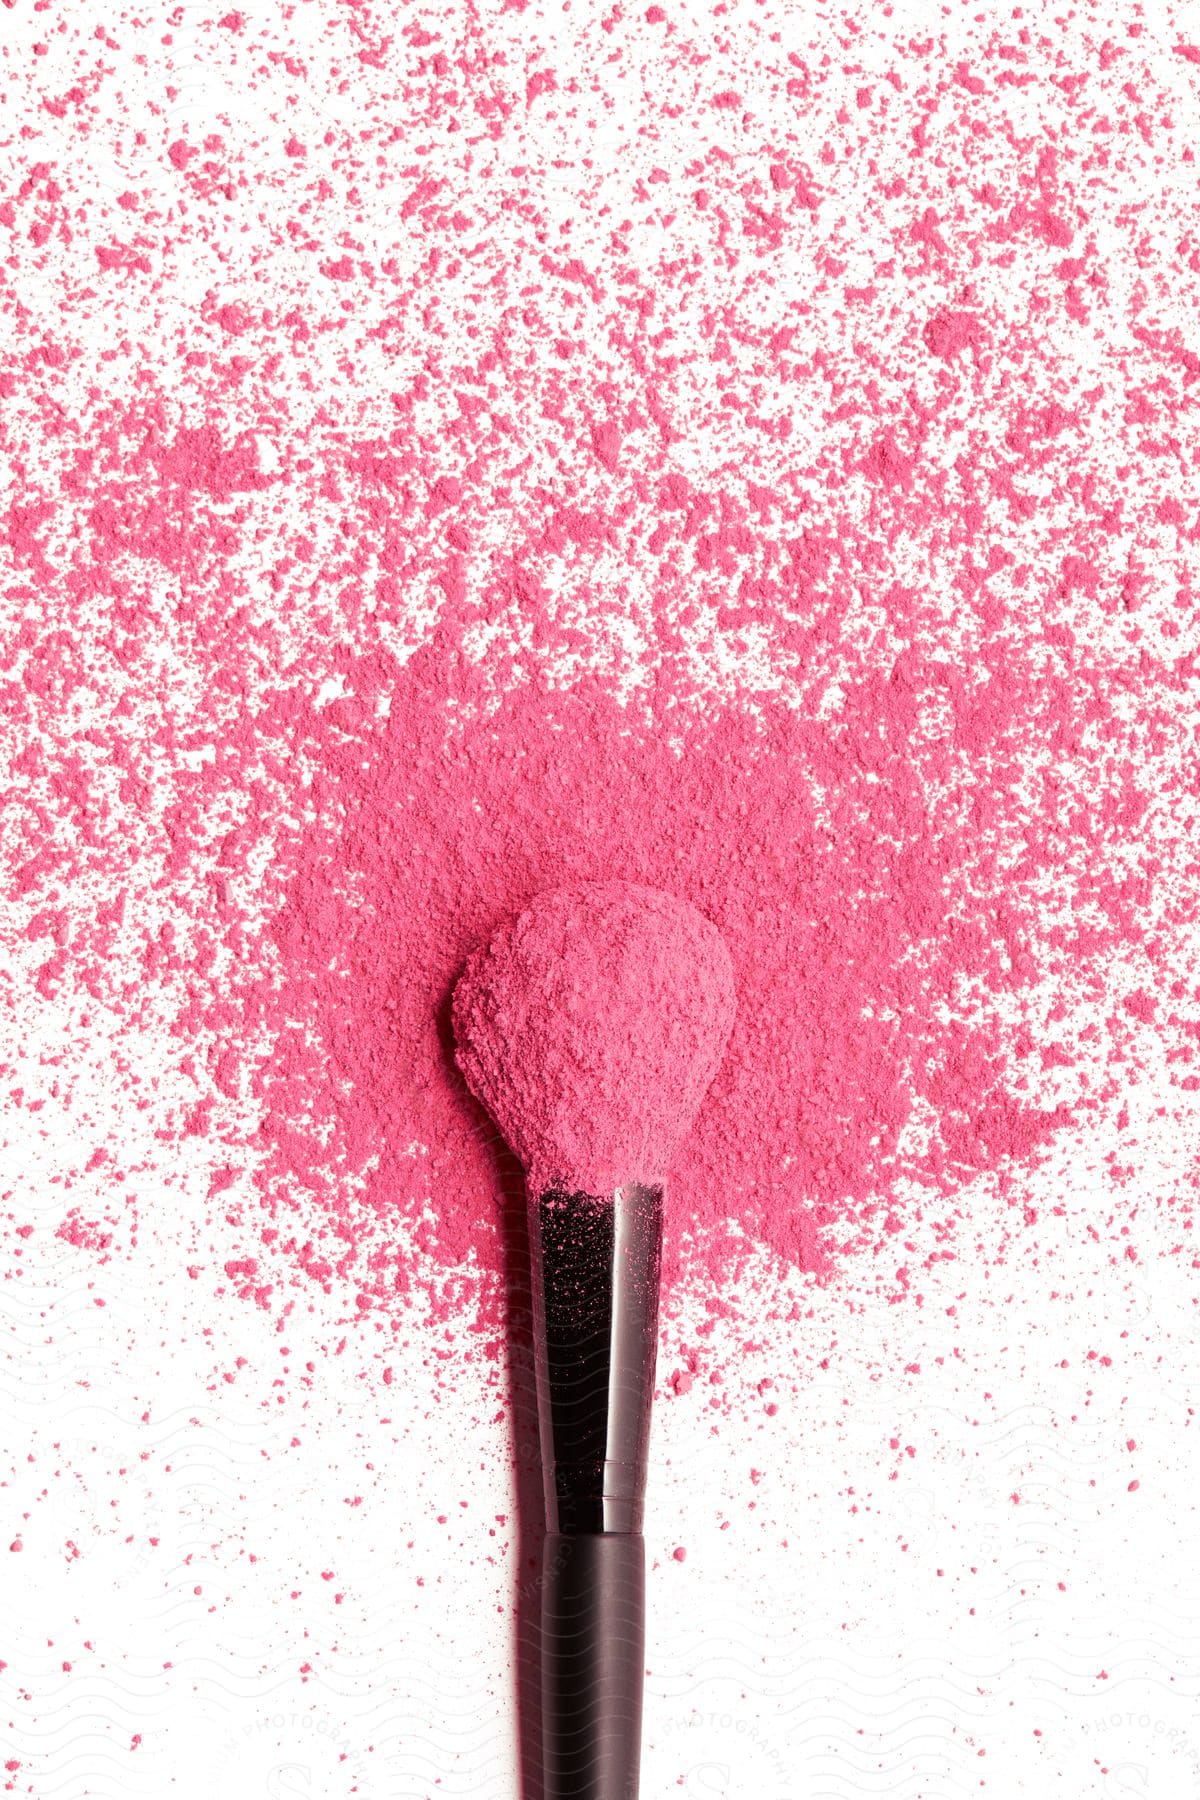 Close up of makeup brush with pink powder scattered